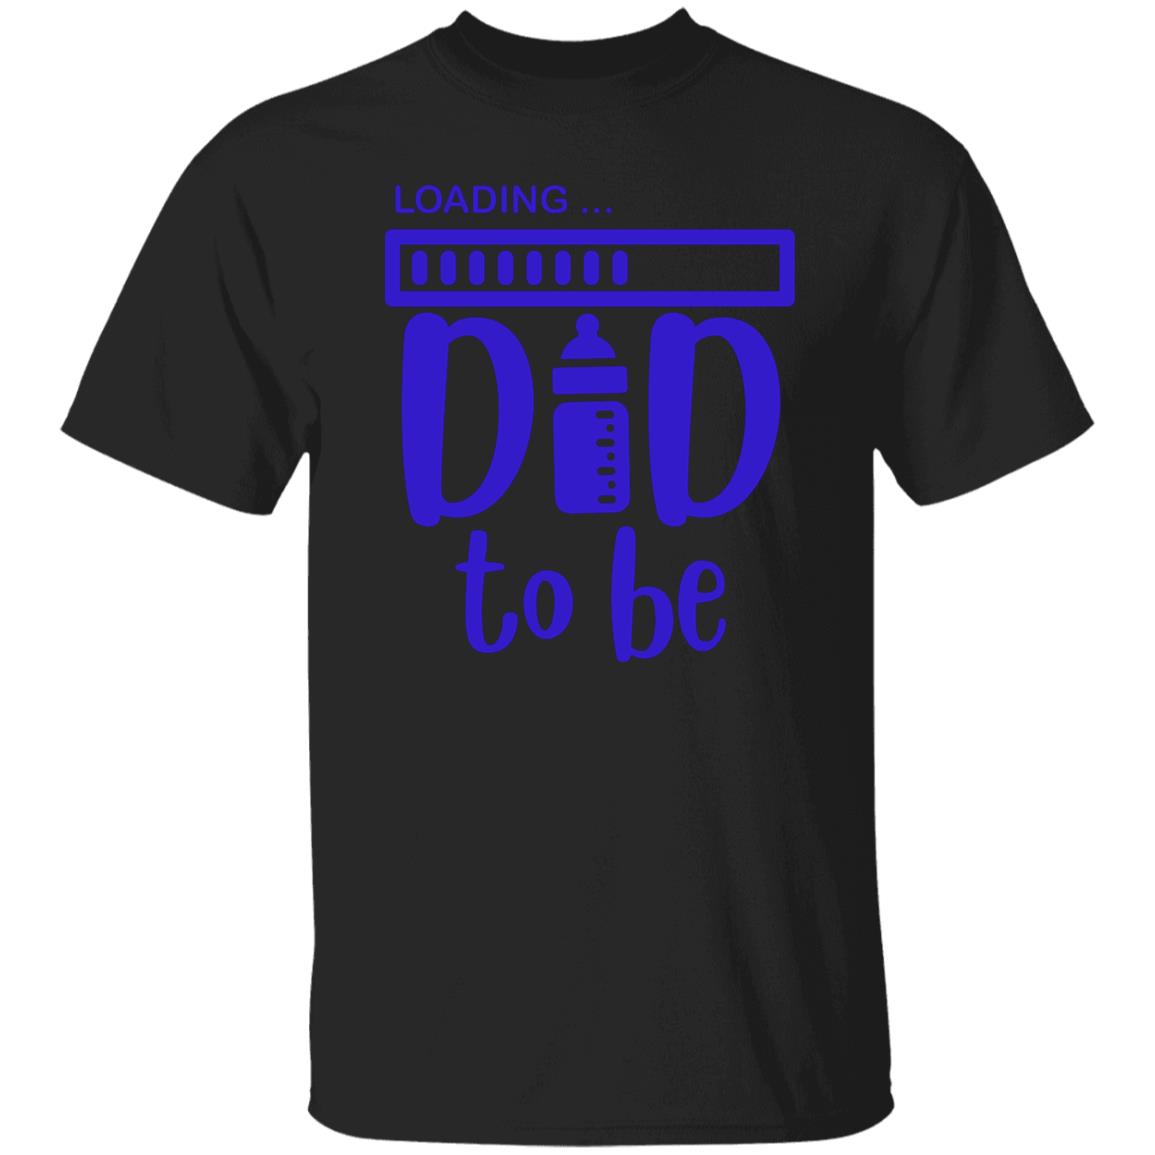 Dad to Be T-Shirt